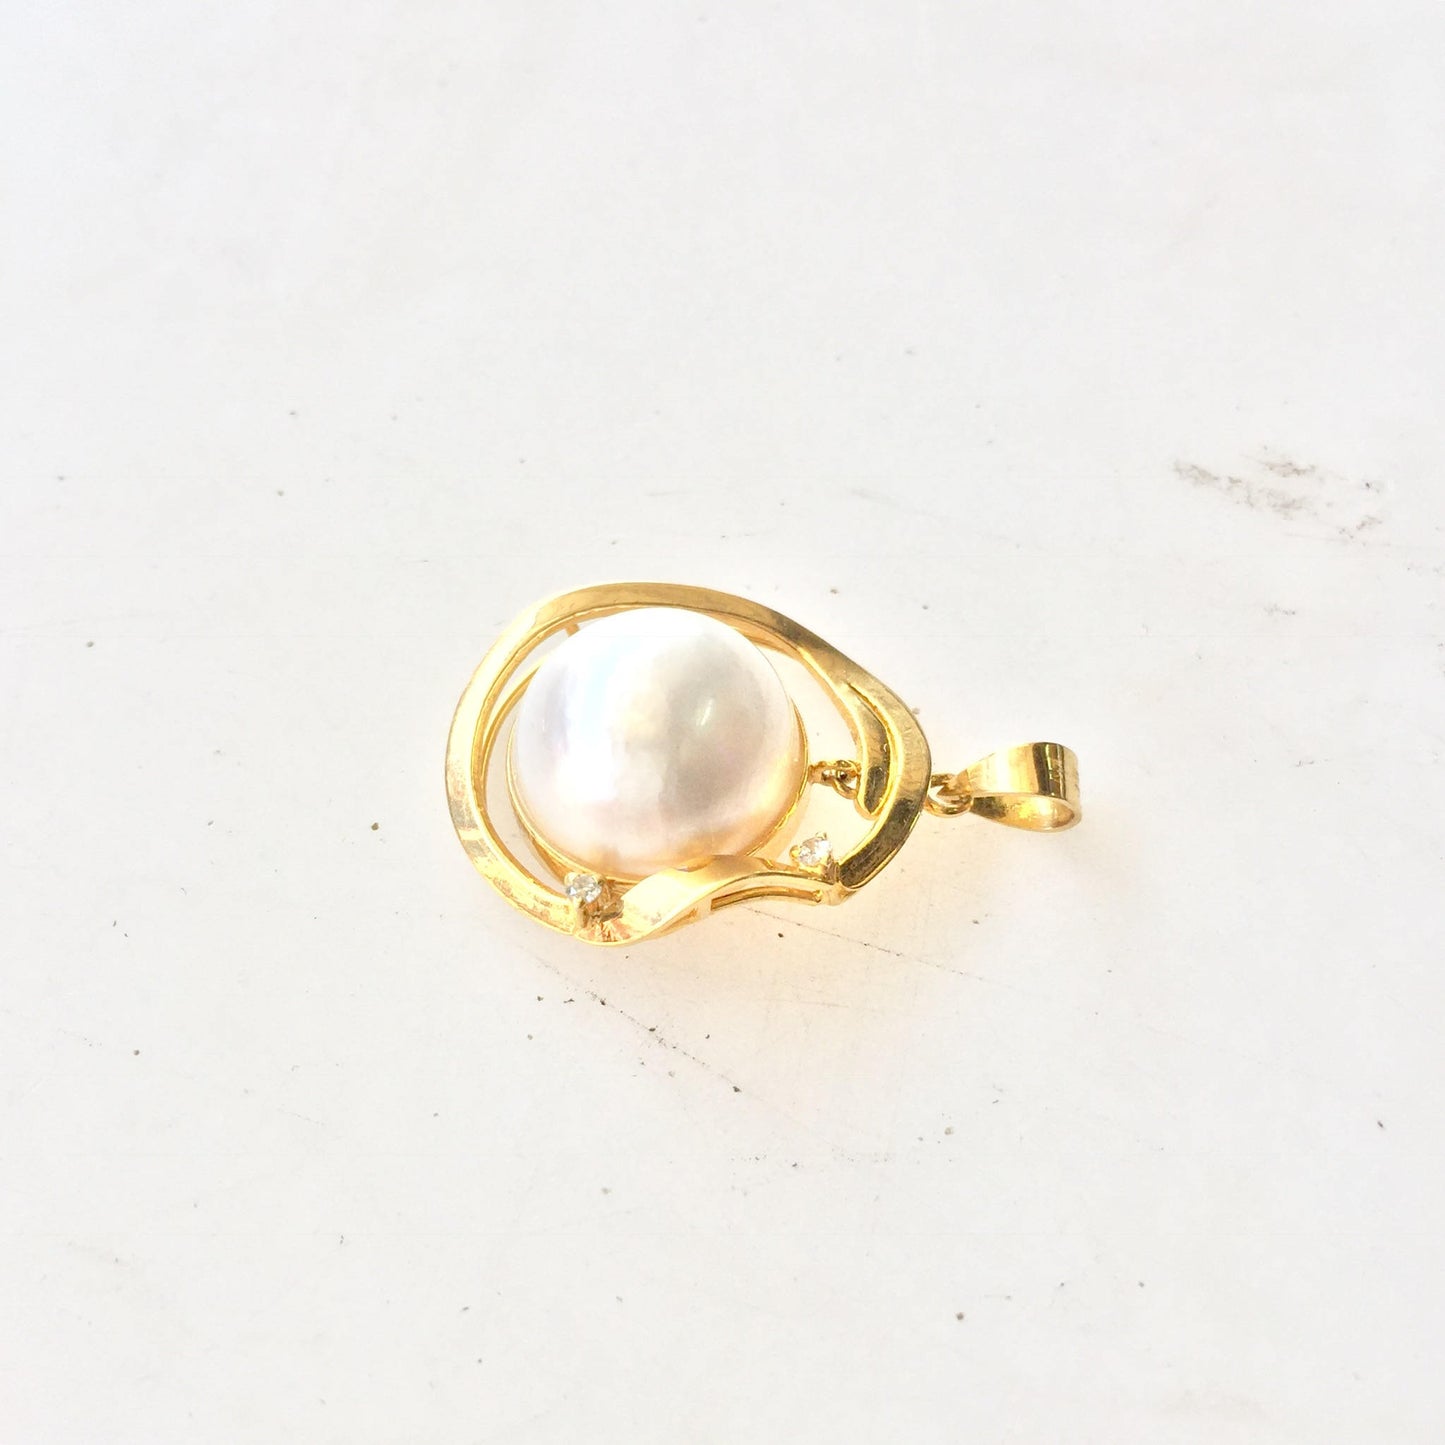 14K gold pendant featuring a lustrous pearl, a timeless piece of vintage jewelry perfect for bridal wear or as a gift for her.